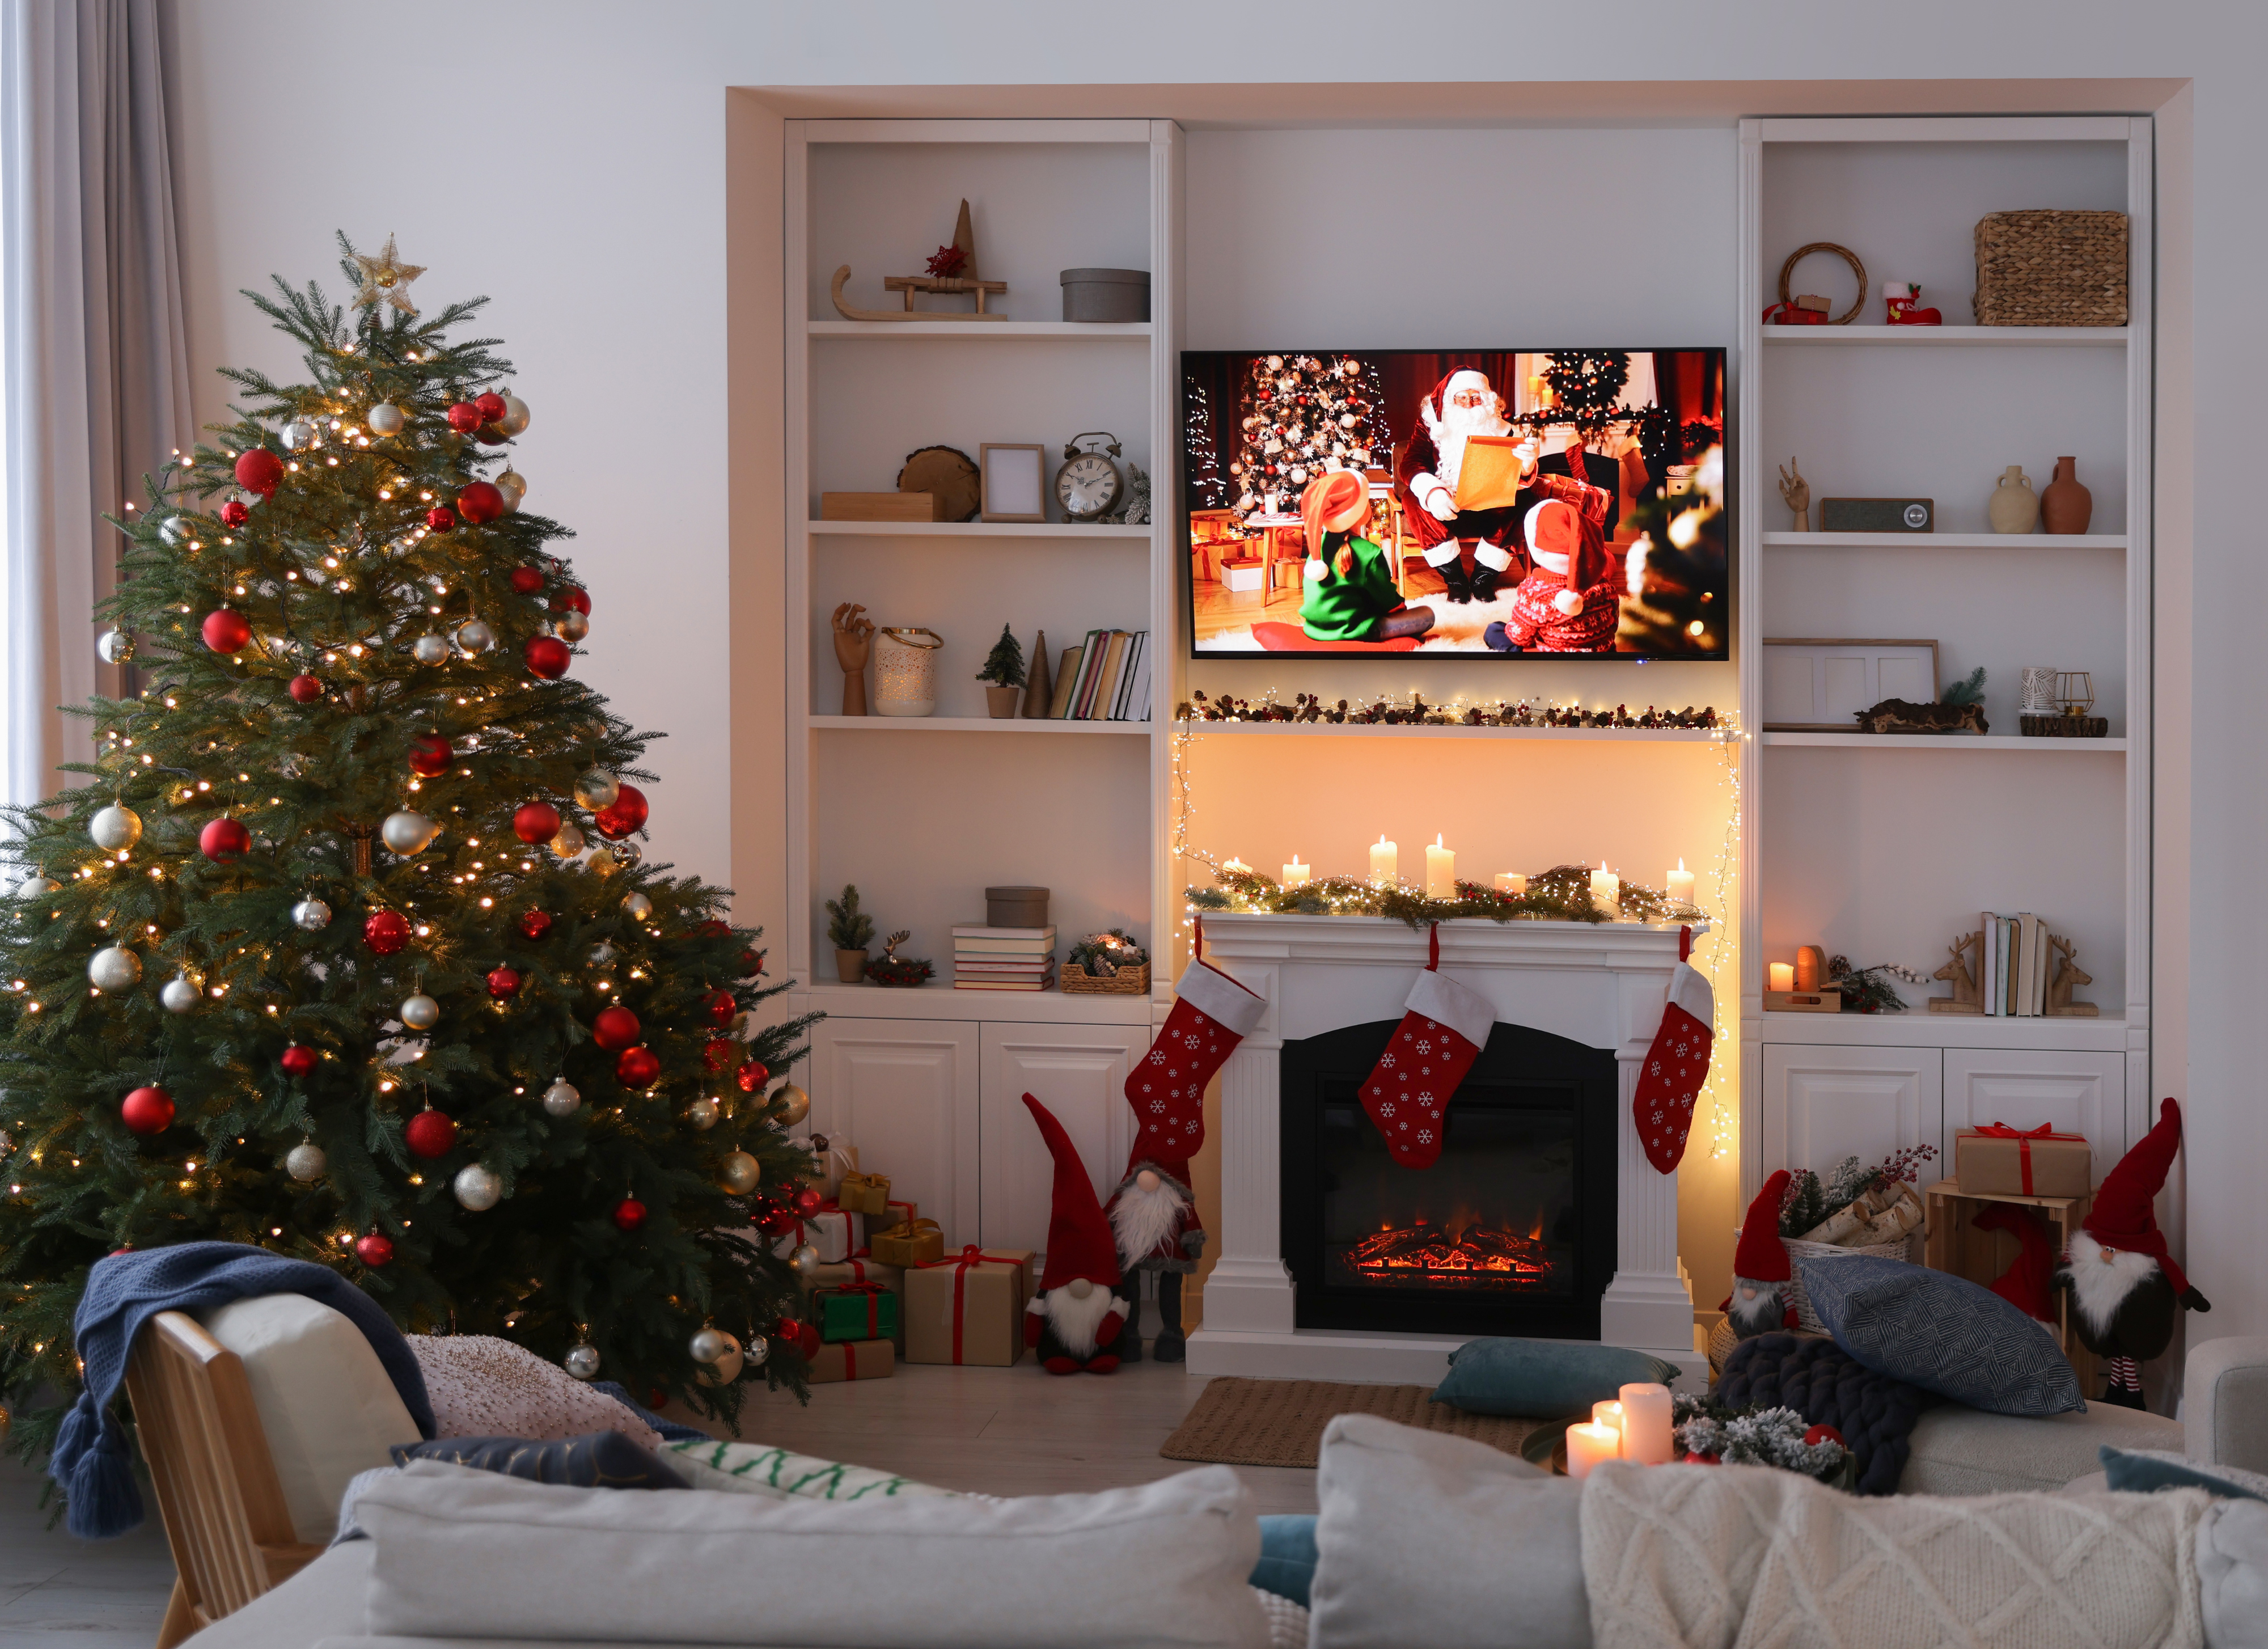 Five Easy Tips for Making Holiday Magic at Home